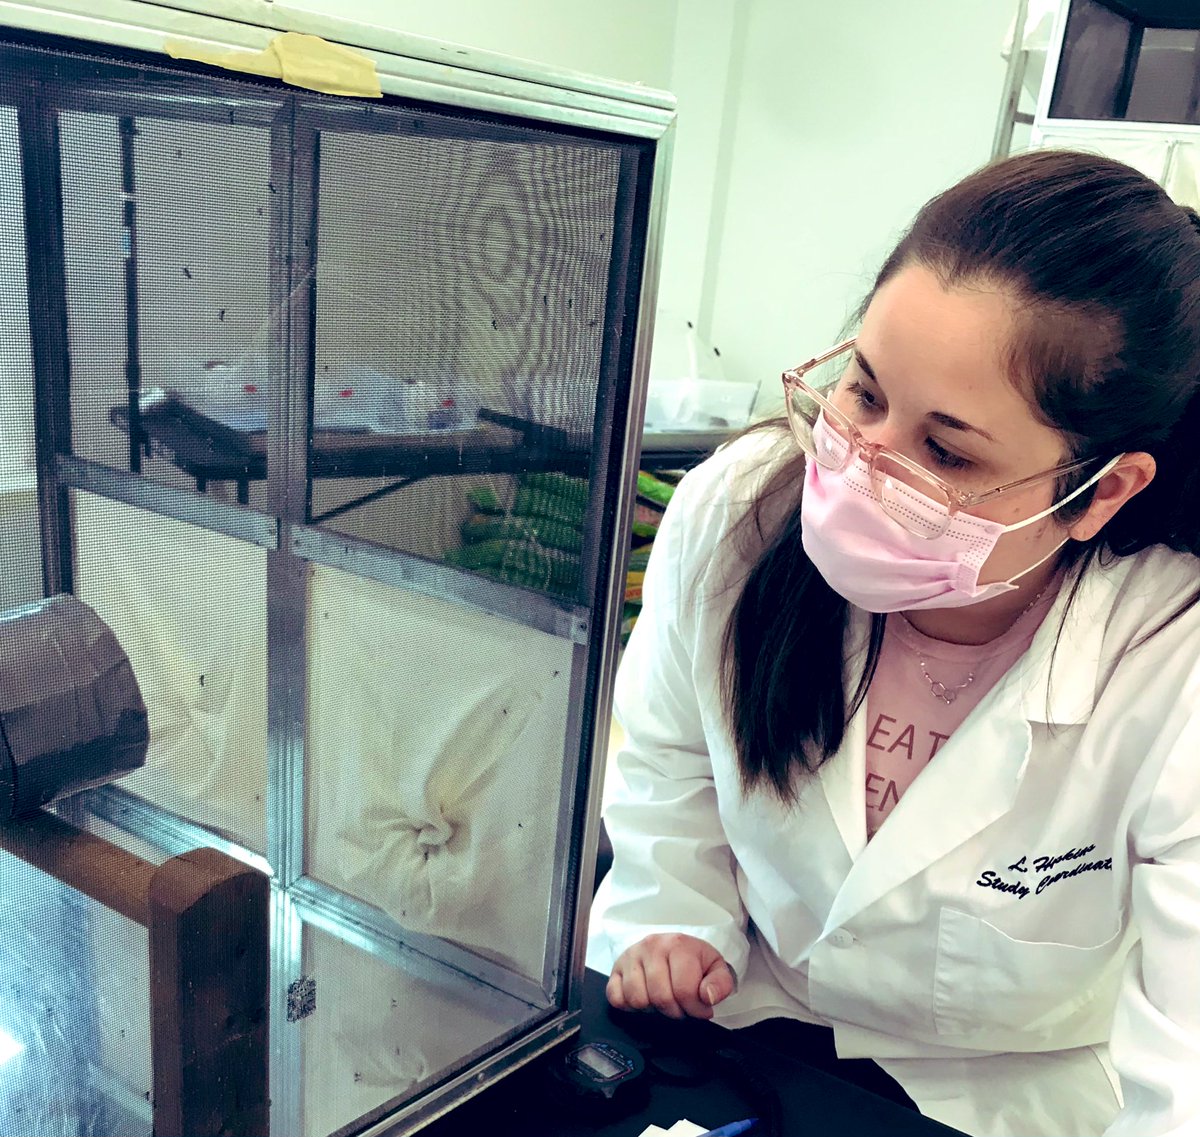 Our team @i2LResearchUSA spent the last week conducting a fabric probe screening w/ Aedes aegypti, yellow fever mosquitos. Some of us are still counting mosquitos in our sleep. #EfficacyTesting #Rapid #Responsive #Reliable #Entomology #TwitterEnto